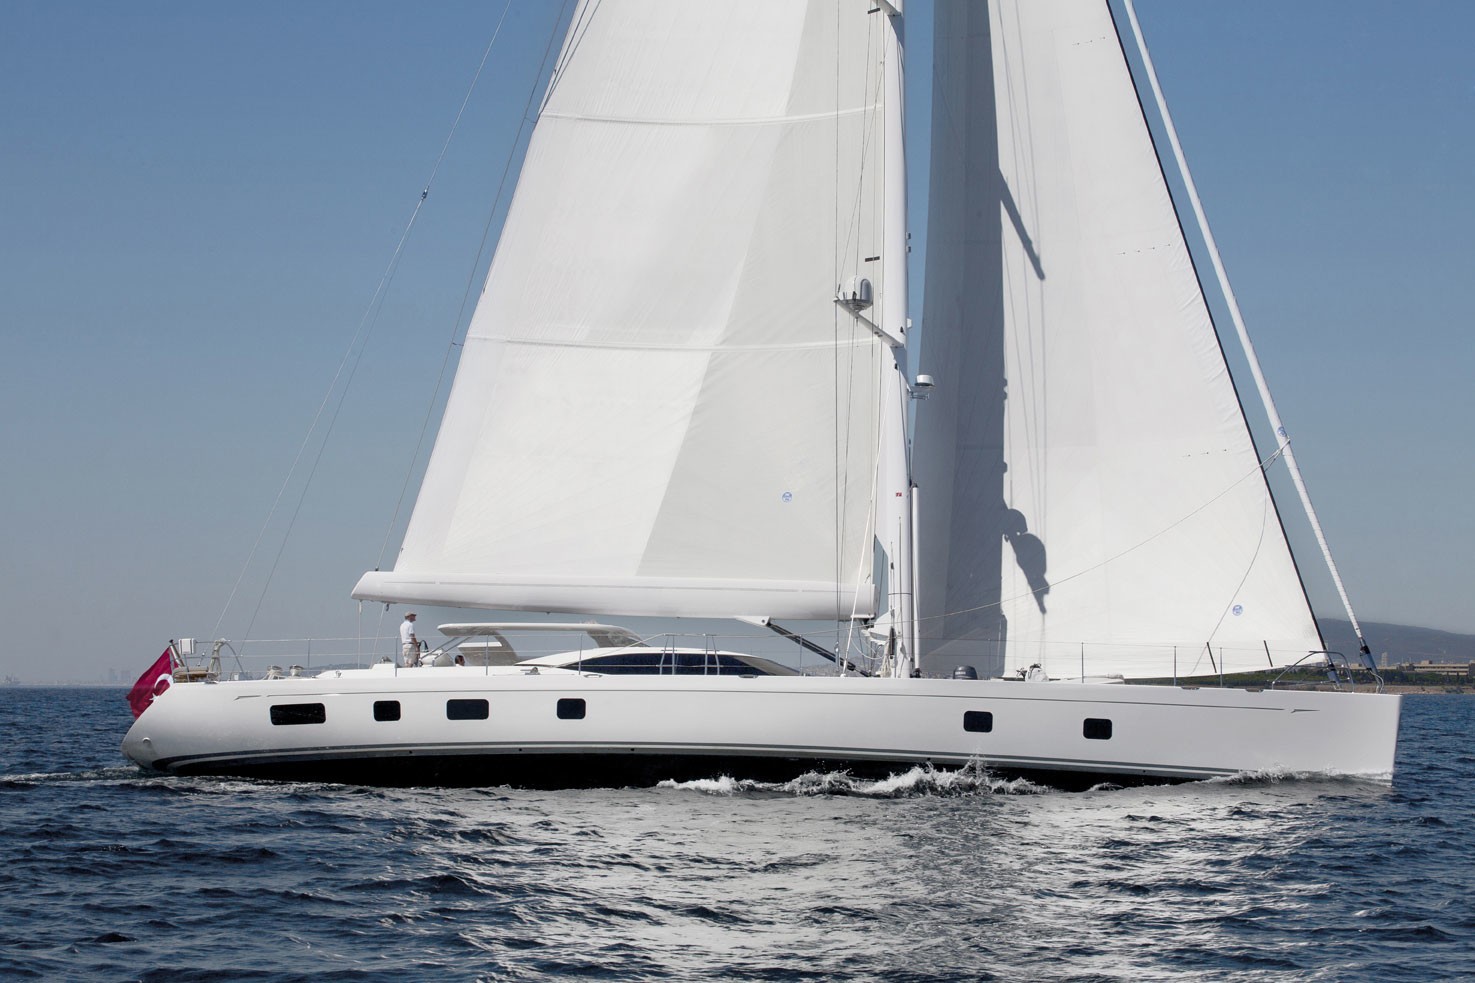 The 30m Yacht PENELOPE